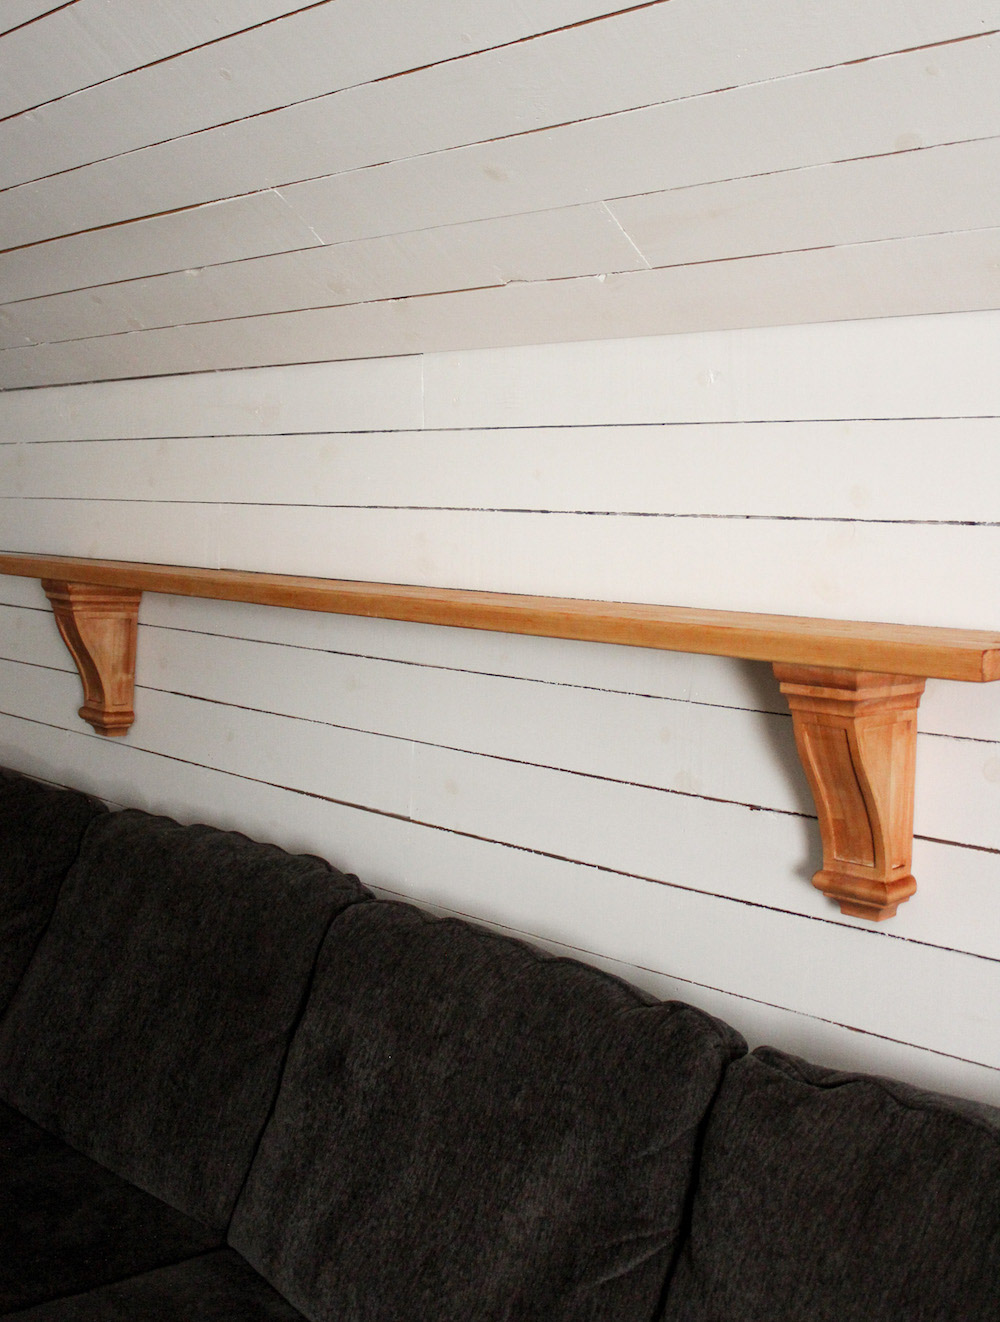 A completed large wall shelf stained with Varathane premium hangs on a white shiplap wall.